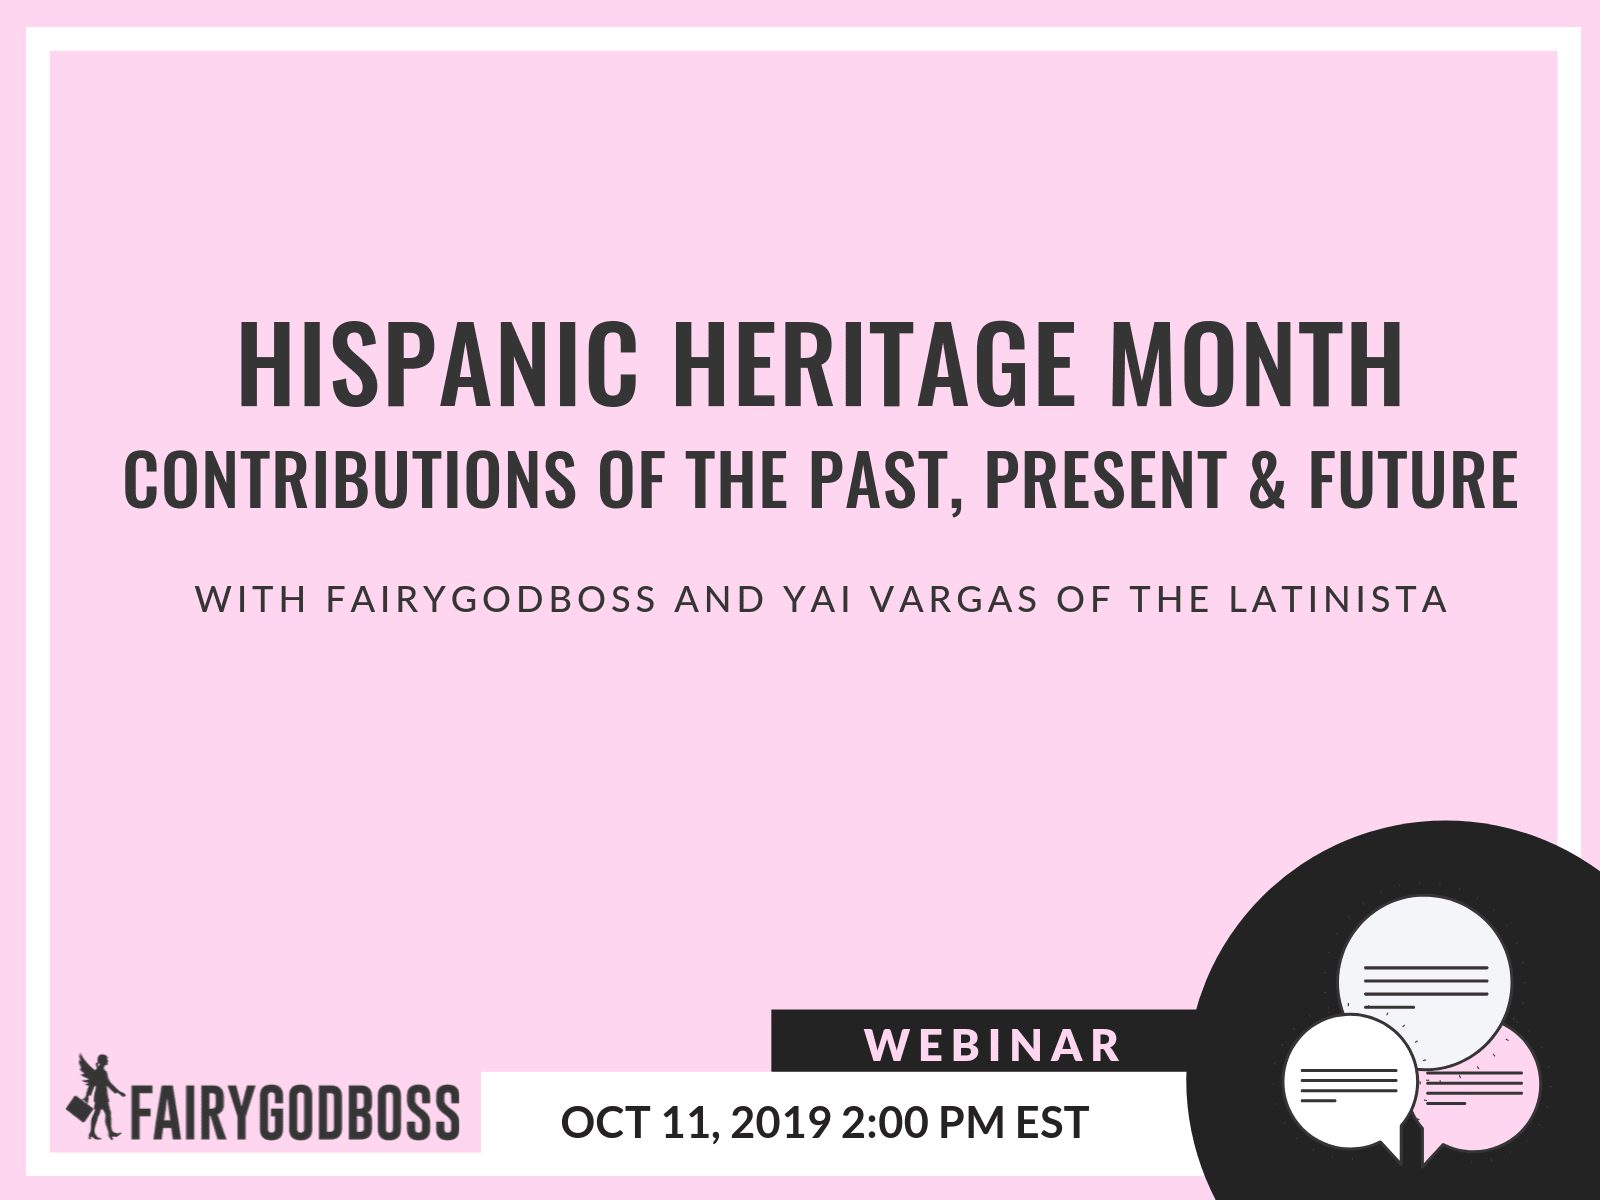 Hispanic Heritage Month: Contributions of the Past, Present & Future